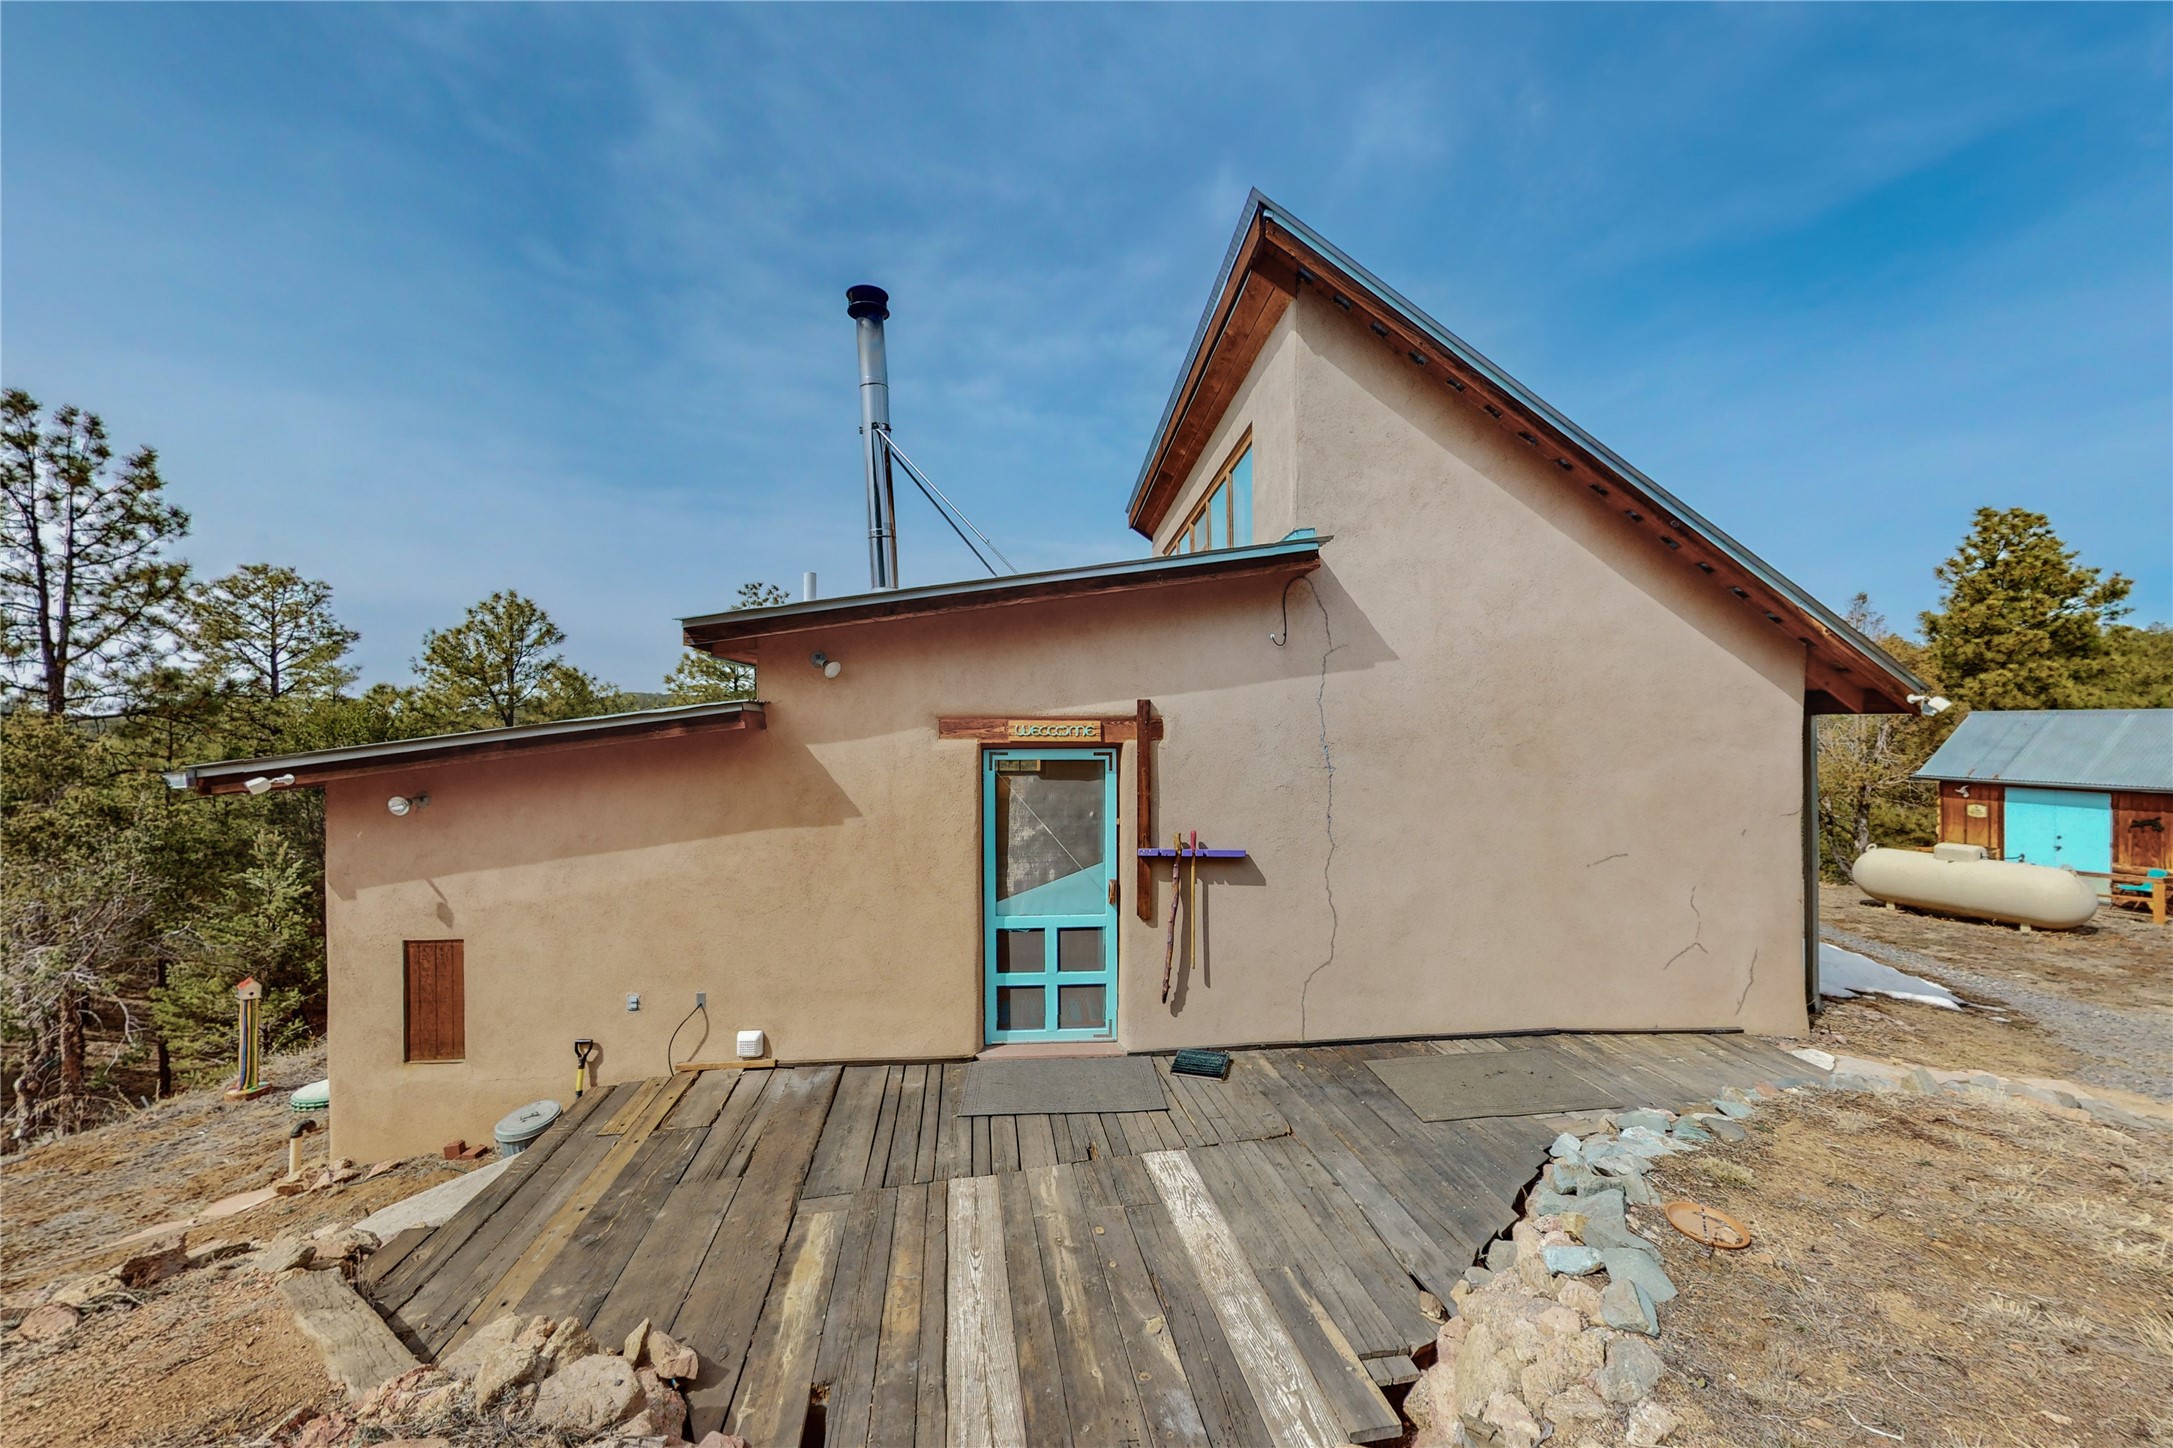 53 Old Forest Trail, Santa Fe, New Mexico 87505, 2 Bedrooms Bedrooms, ,1 BathroomBathrooms,Residential,For Sale,53 Old Forest Trail,202400692